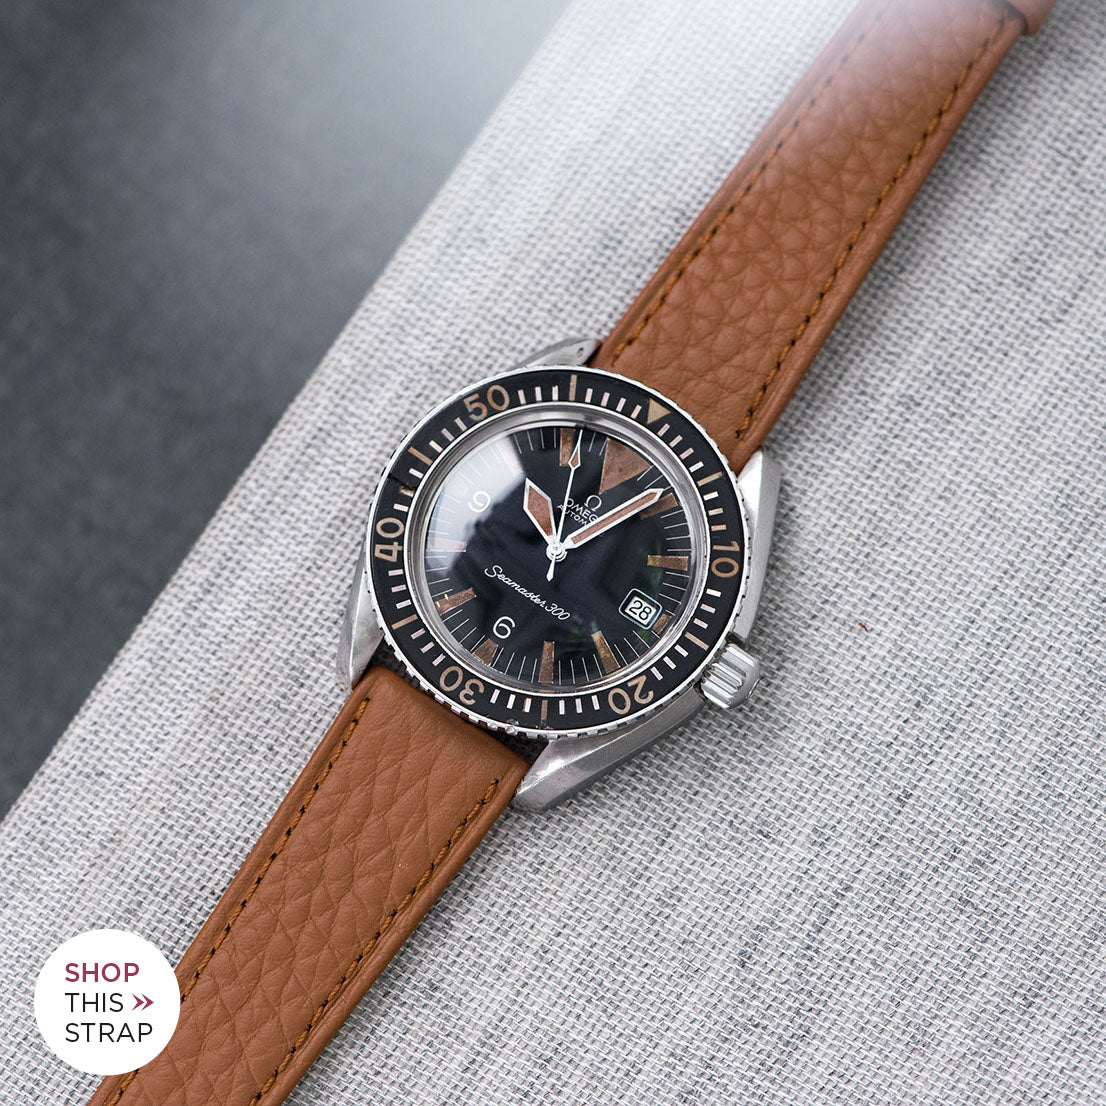 Bulang and Sons_Strap Guide_The omega SM 300 Seamaster_Taurillon Brown Speedy Leather Watch Strap